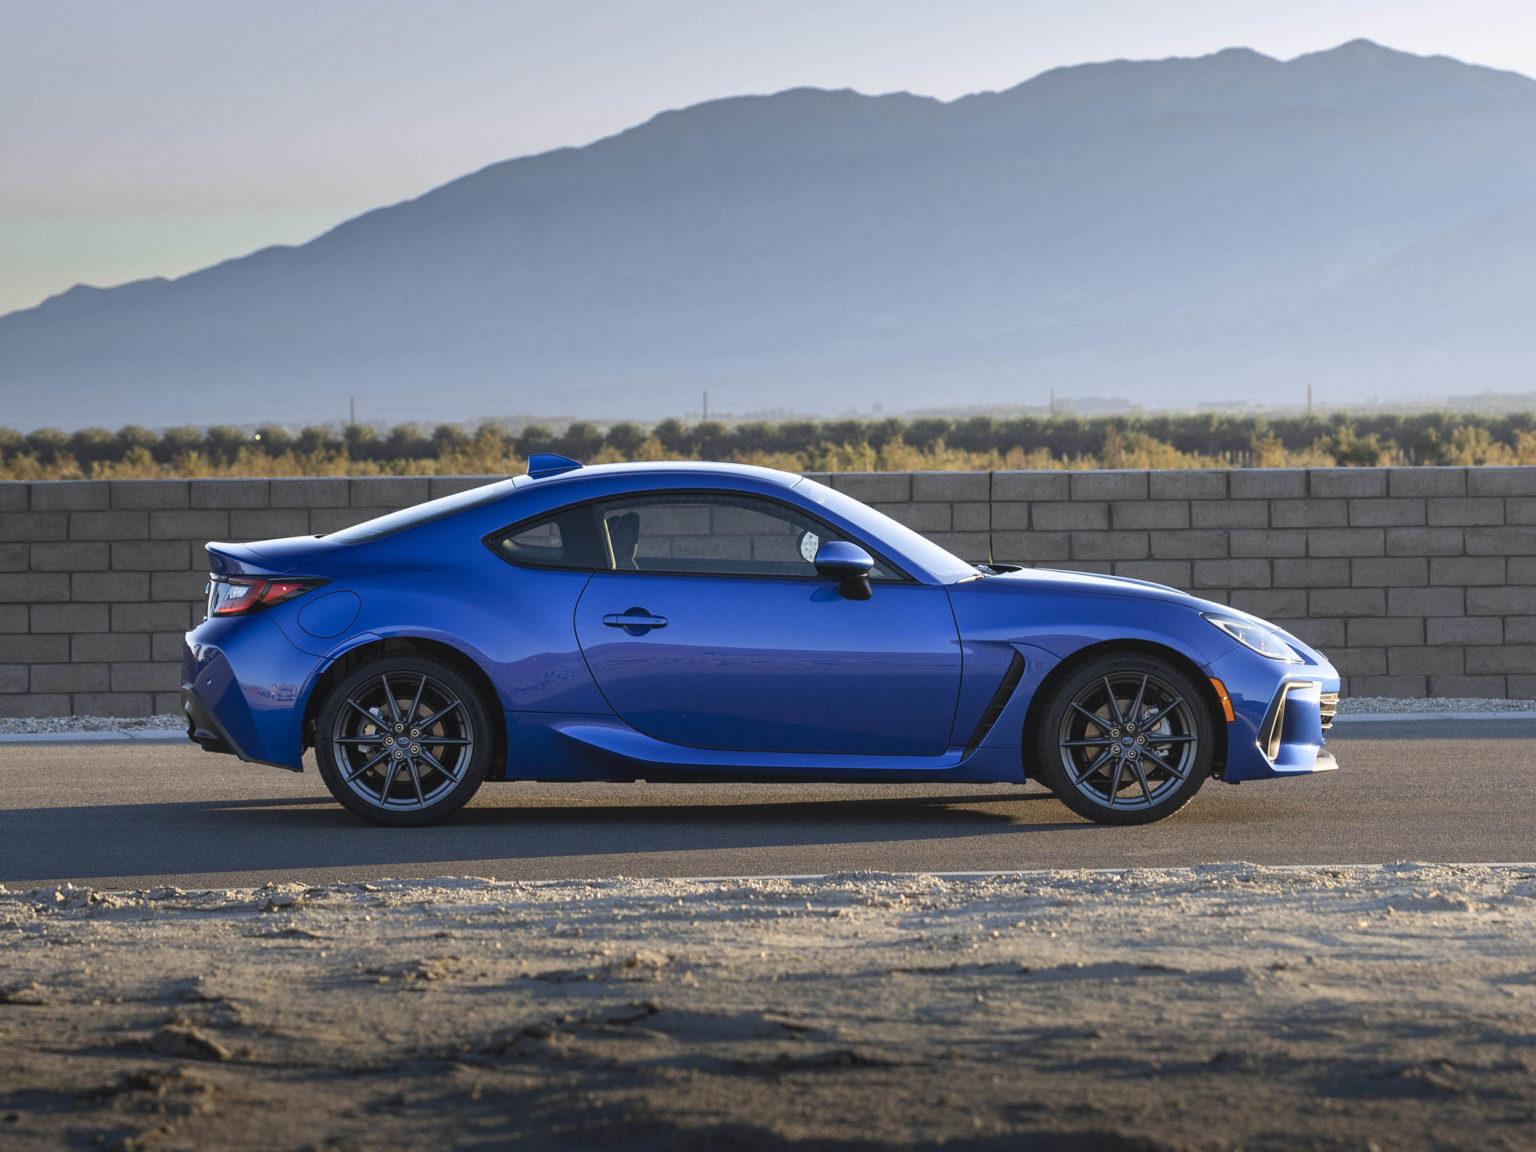 Toyota and Subaru have co-developed a new generation of the Subaru BRZ.